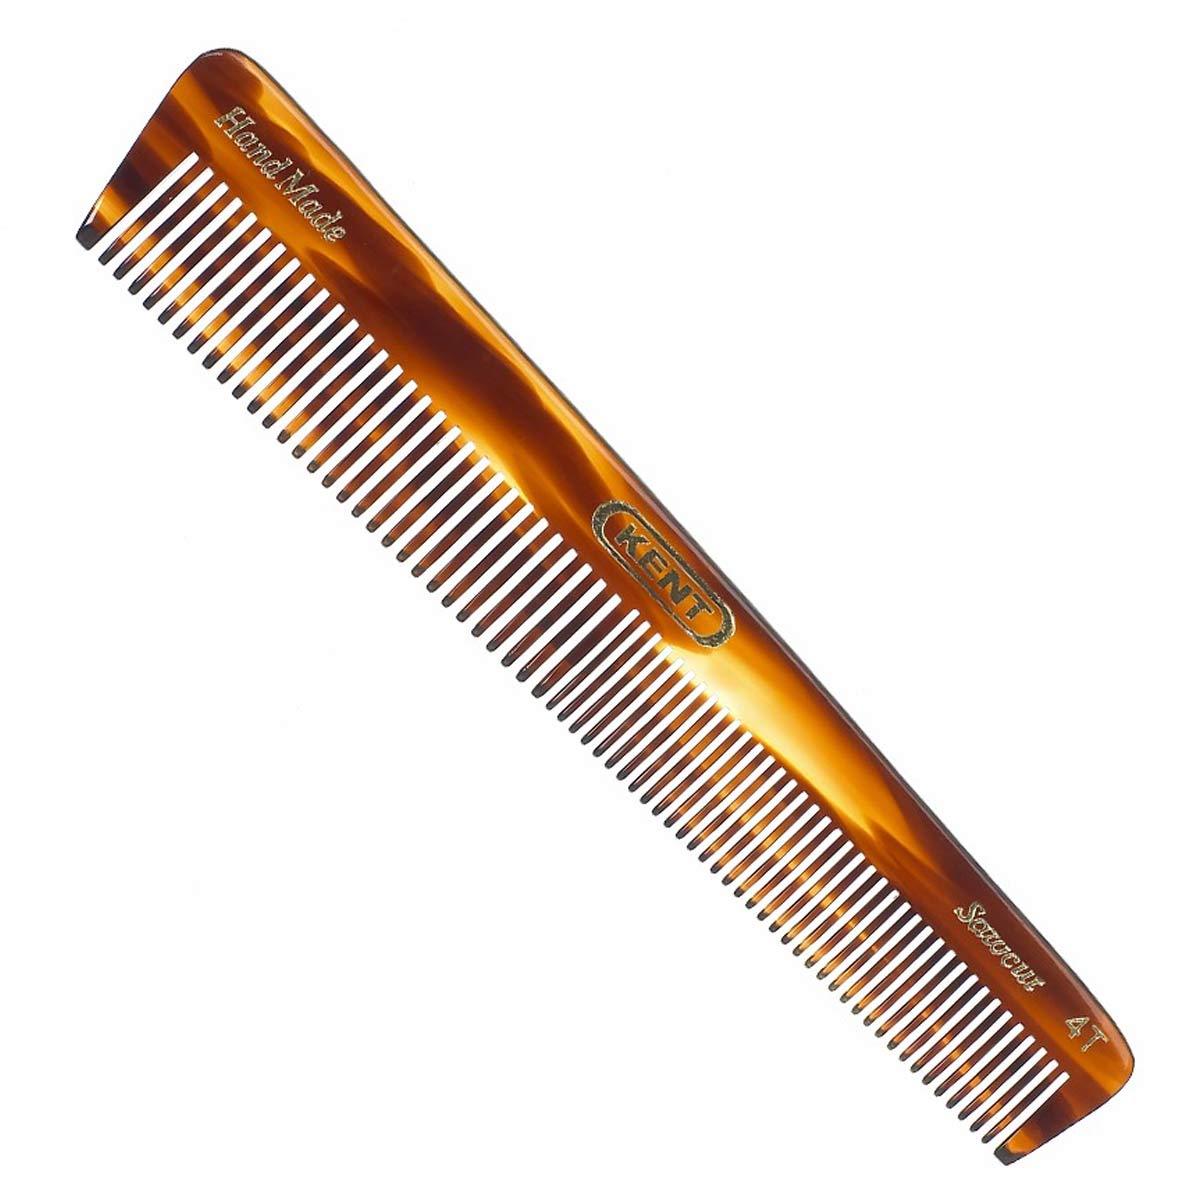 Primary image of 155mm General Grooming Comb